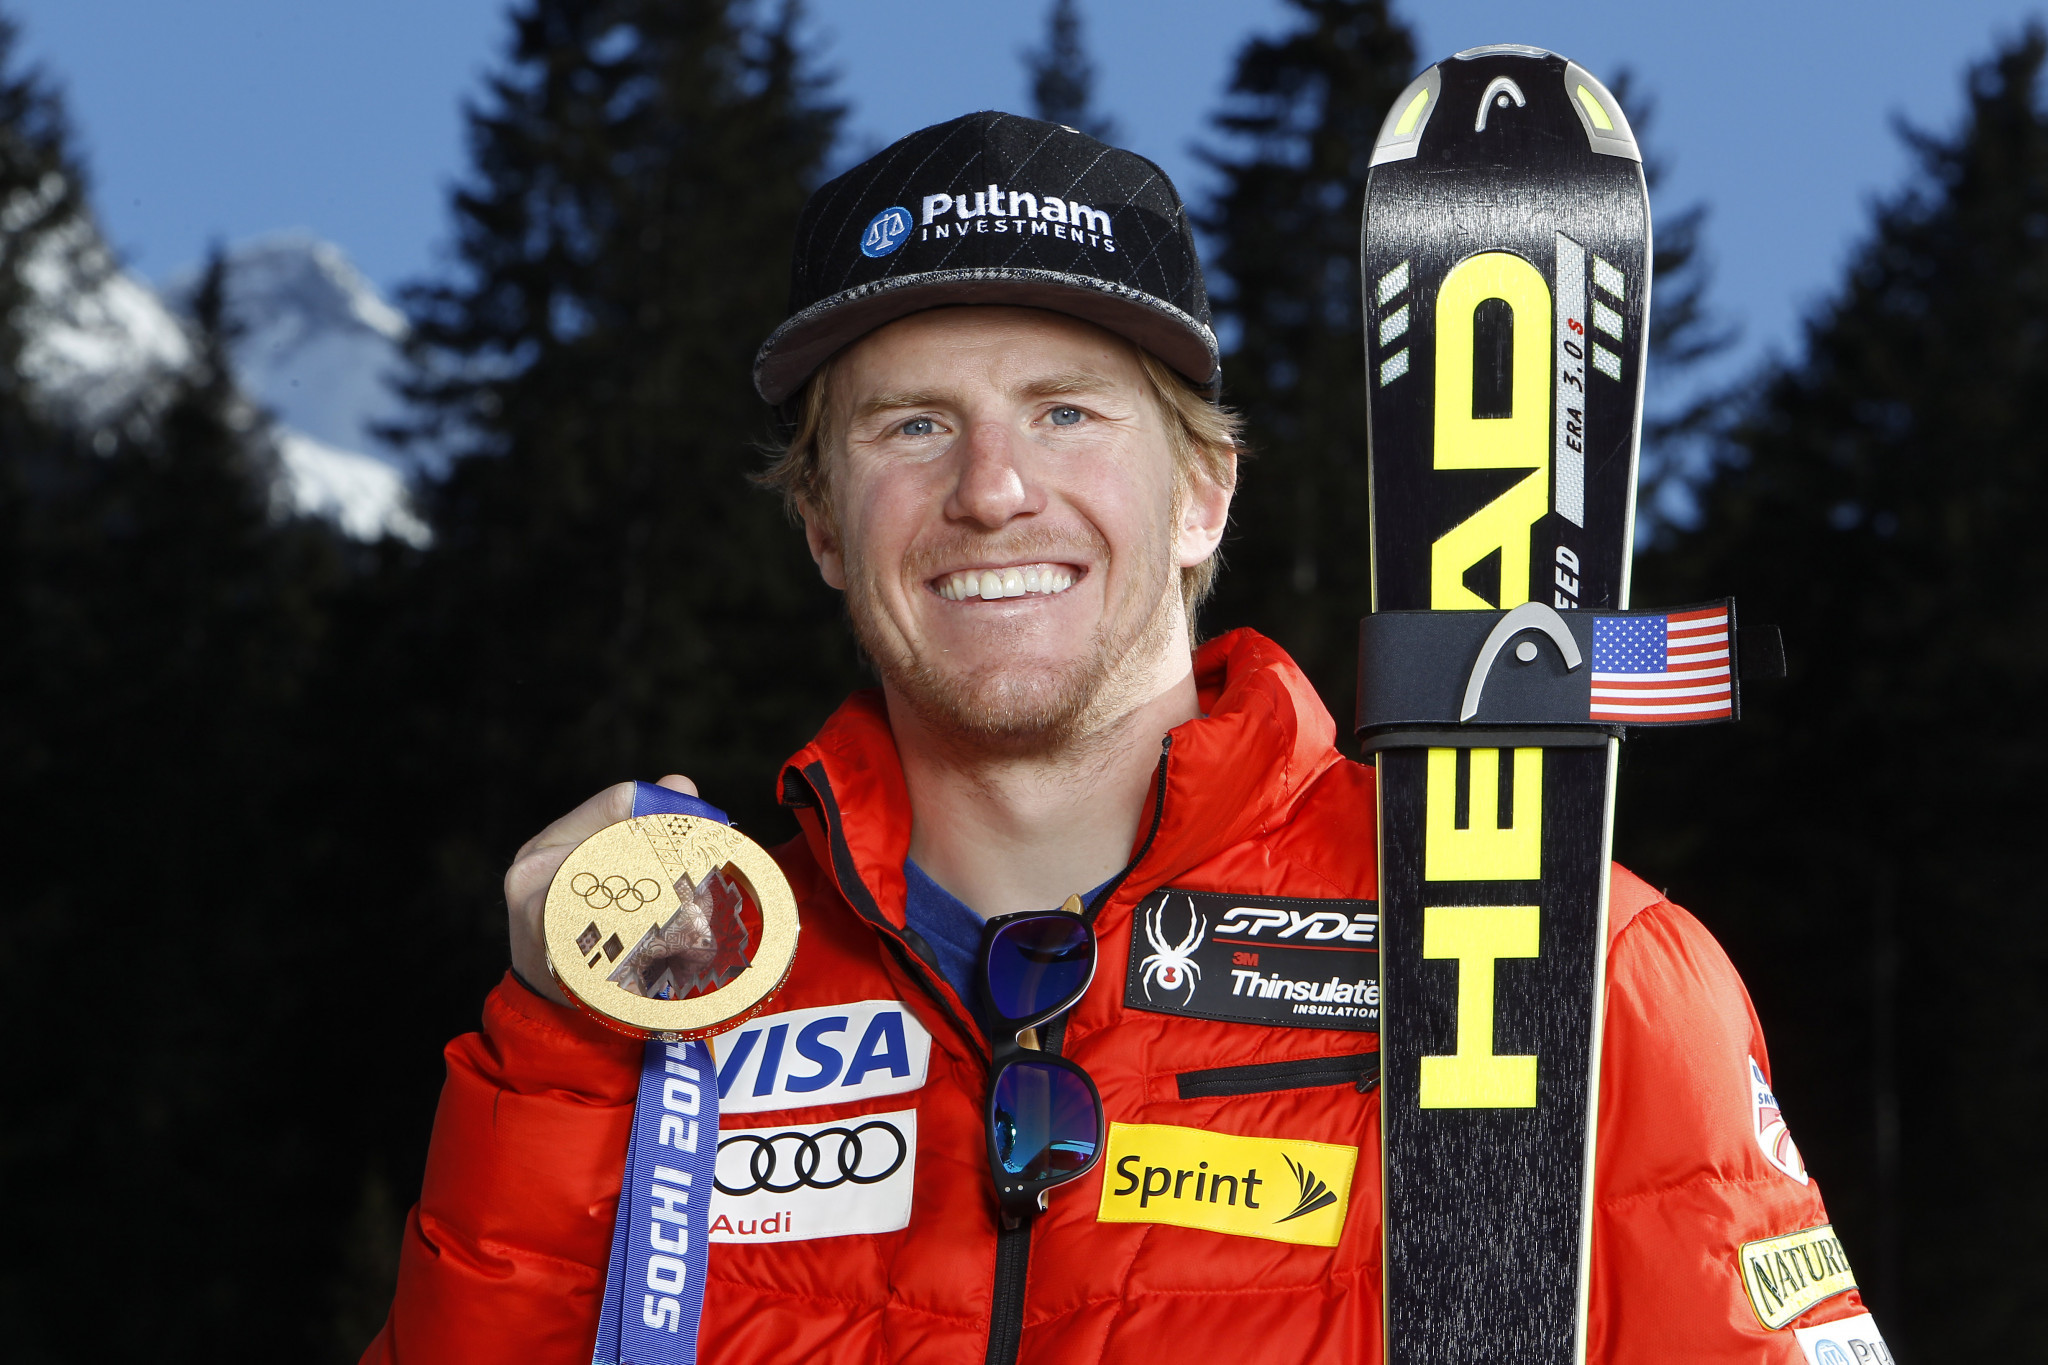 Ted Ligety won his second Olympic gold at Sochi 2014 ©Getty Images